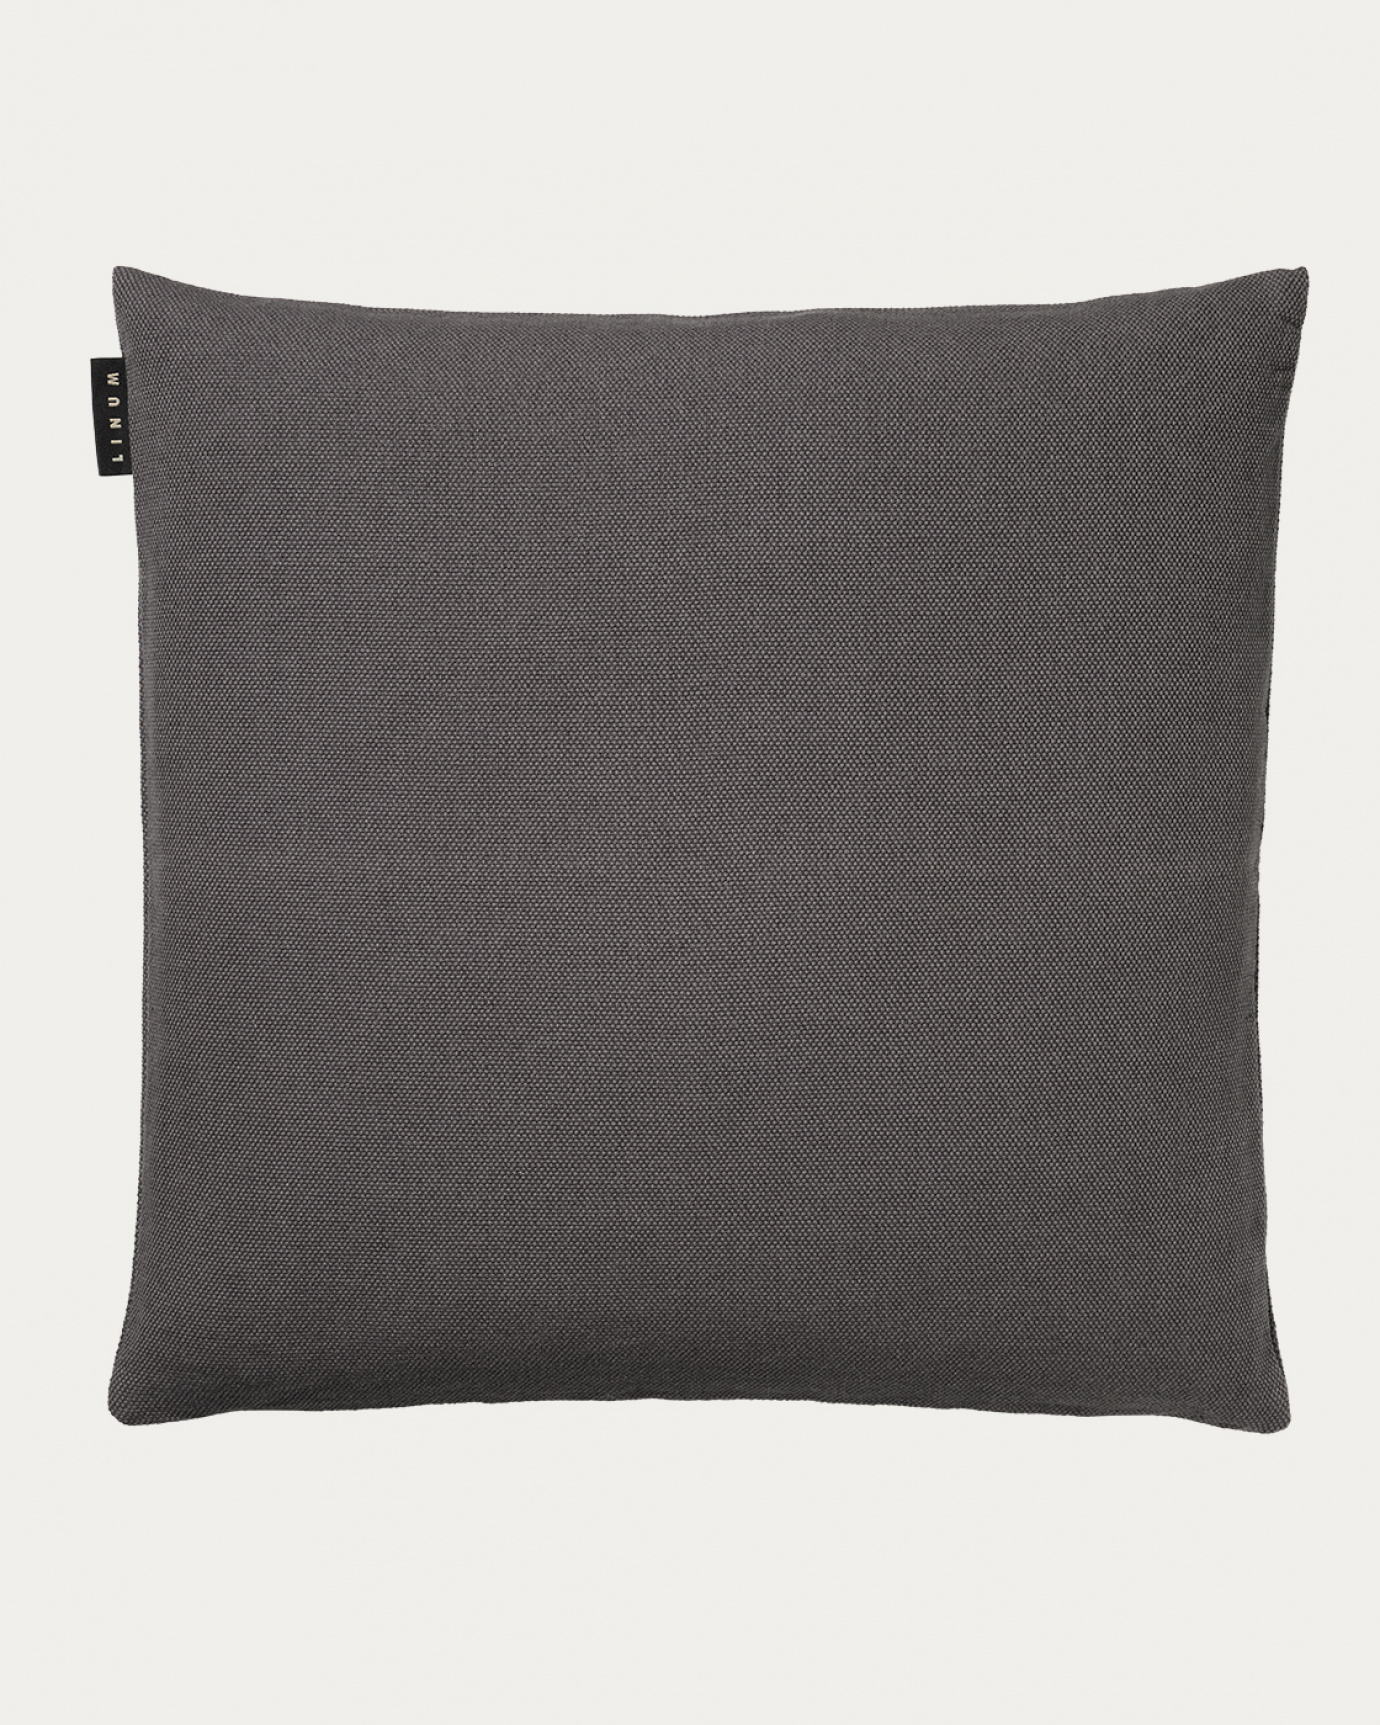 Product image granite grey PEPPER cushion cover made of soft cotton from LINUM DESIGN. Easy to wash and durable for generations. Size 60x60 cm.